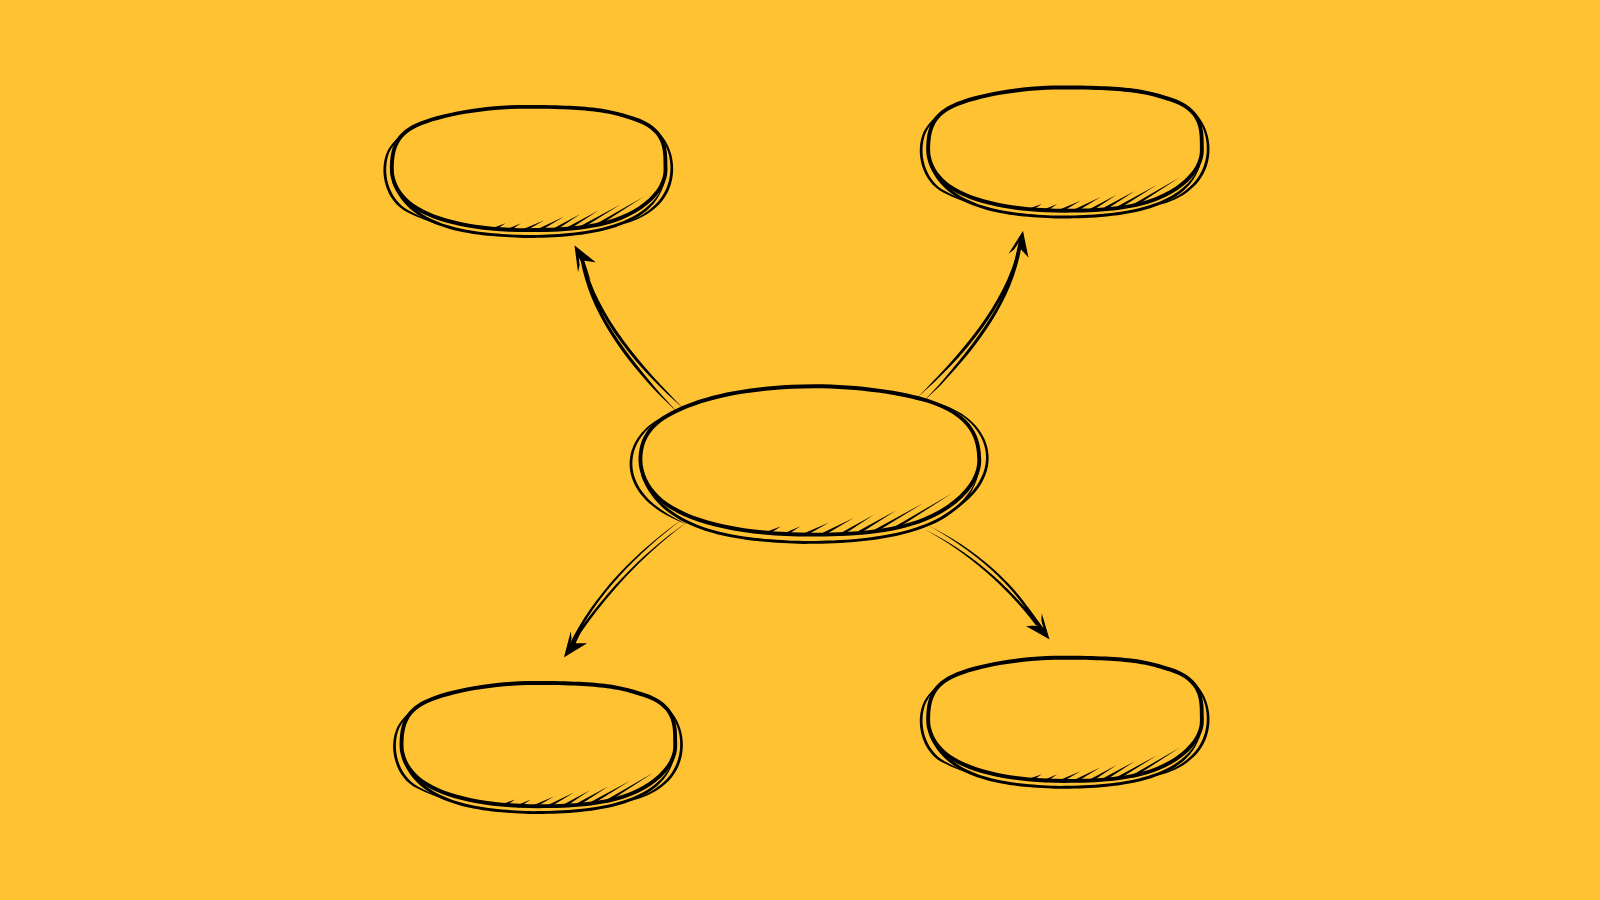 Five ovals with arrows pointing to each other